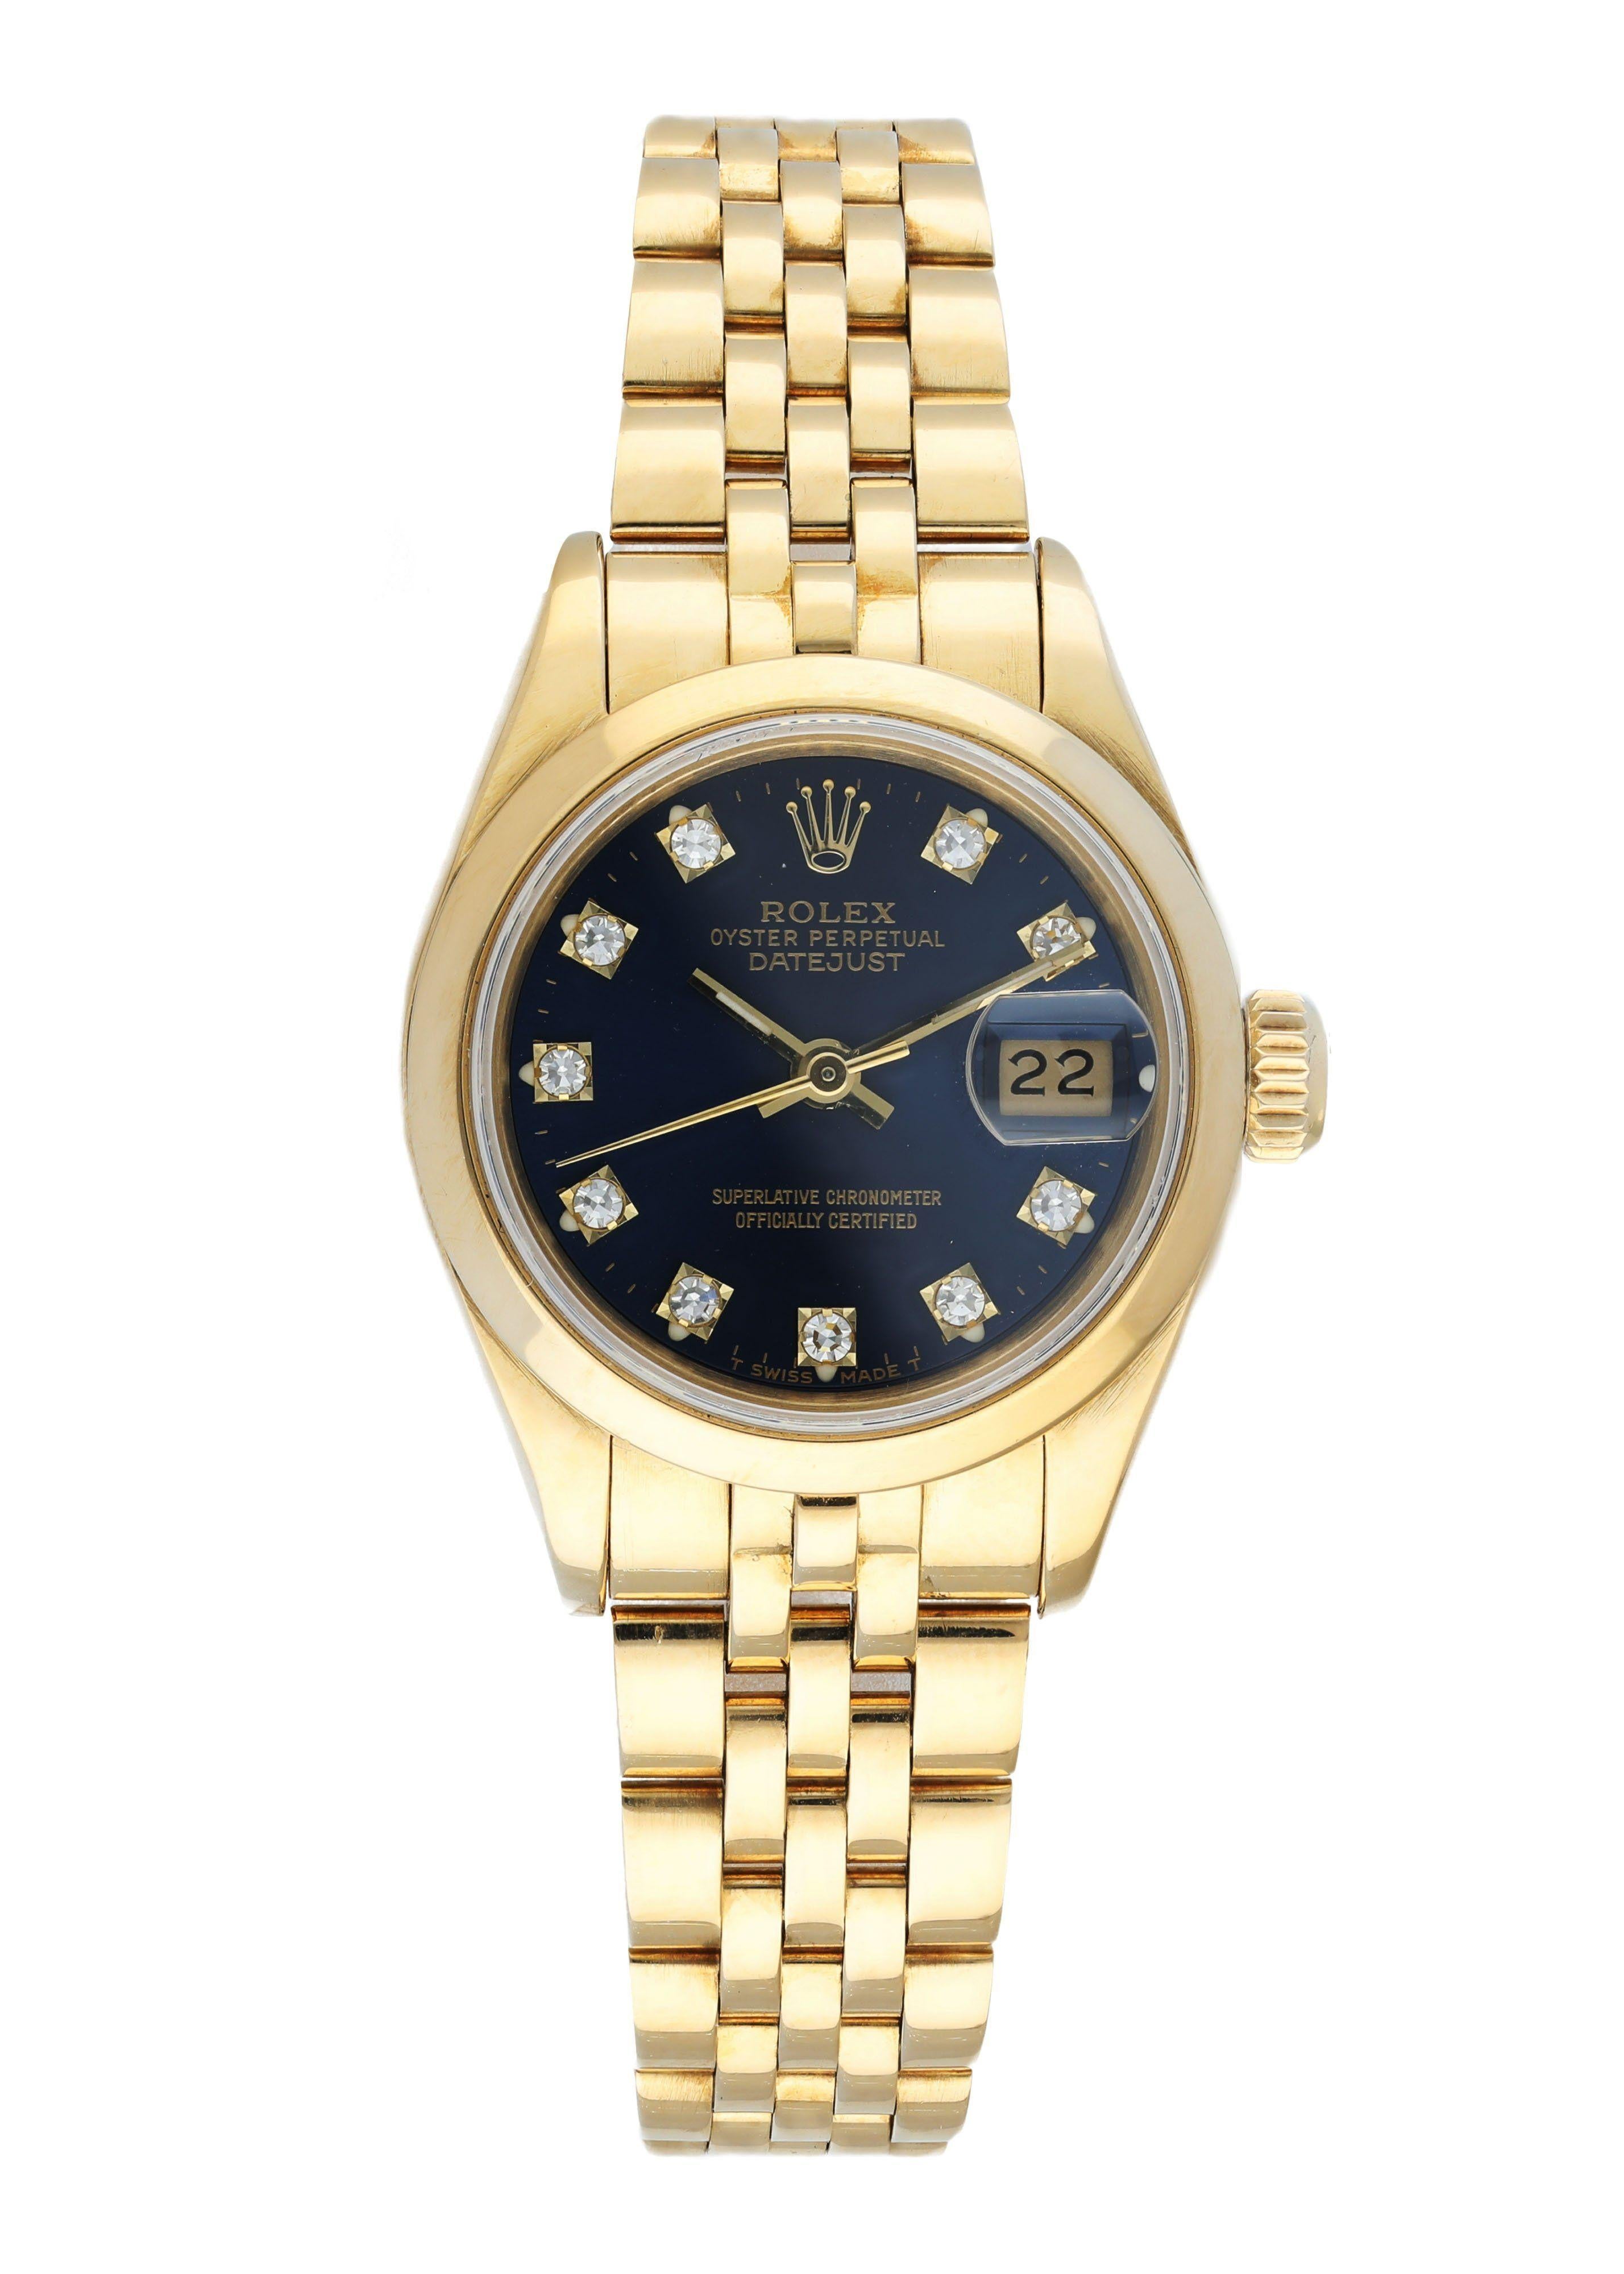 Rolex Datejust 69168 Ladies Watch. 
26mm 18k Yellow Gold case. 
Yellow Gold smooth bezel. 
Blue dial with gold hands and factory set diamond hour markers. 
Minute markers on the outer dial. 
Date display at the 3 o'clock position. 
Yellow Gold